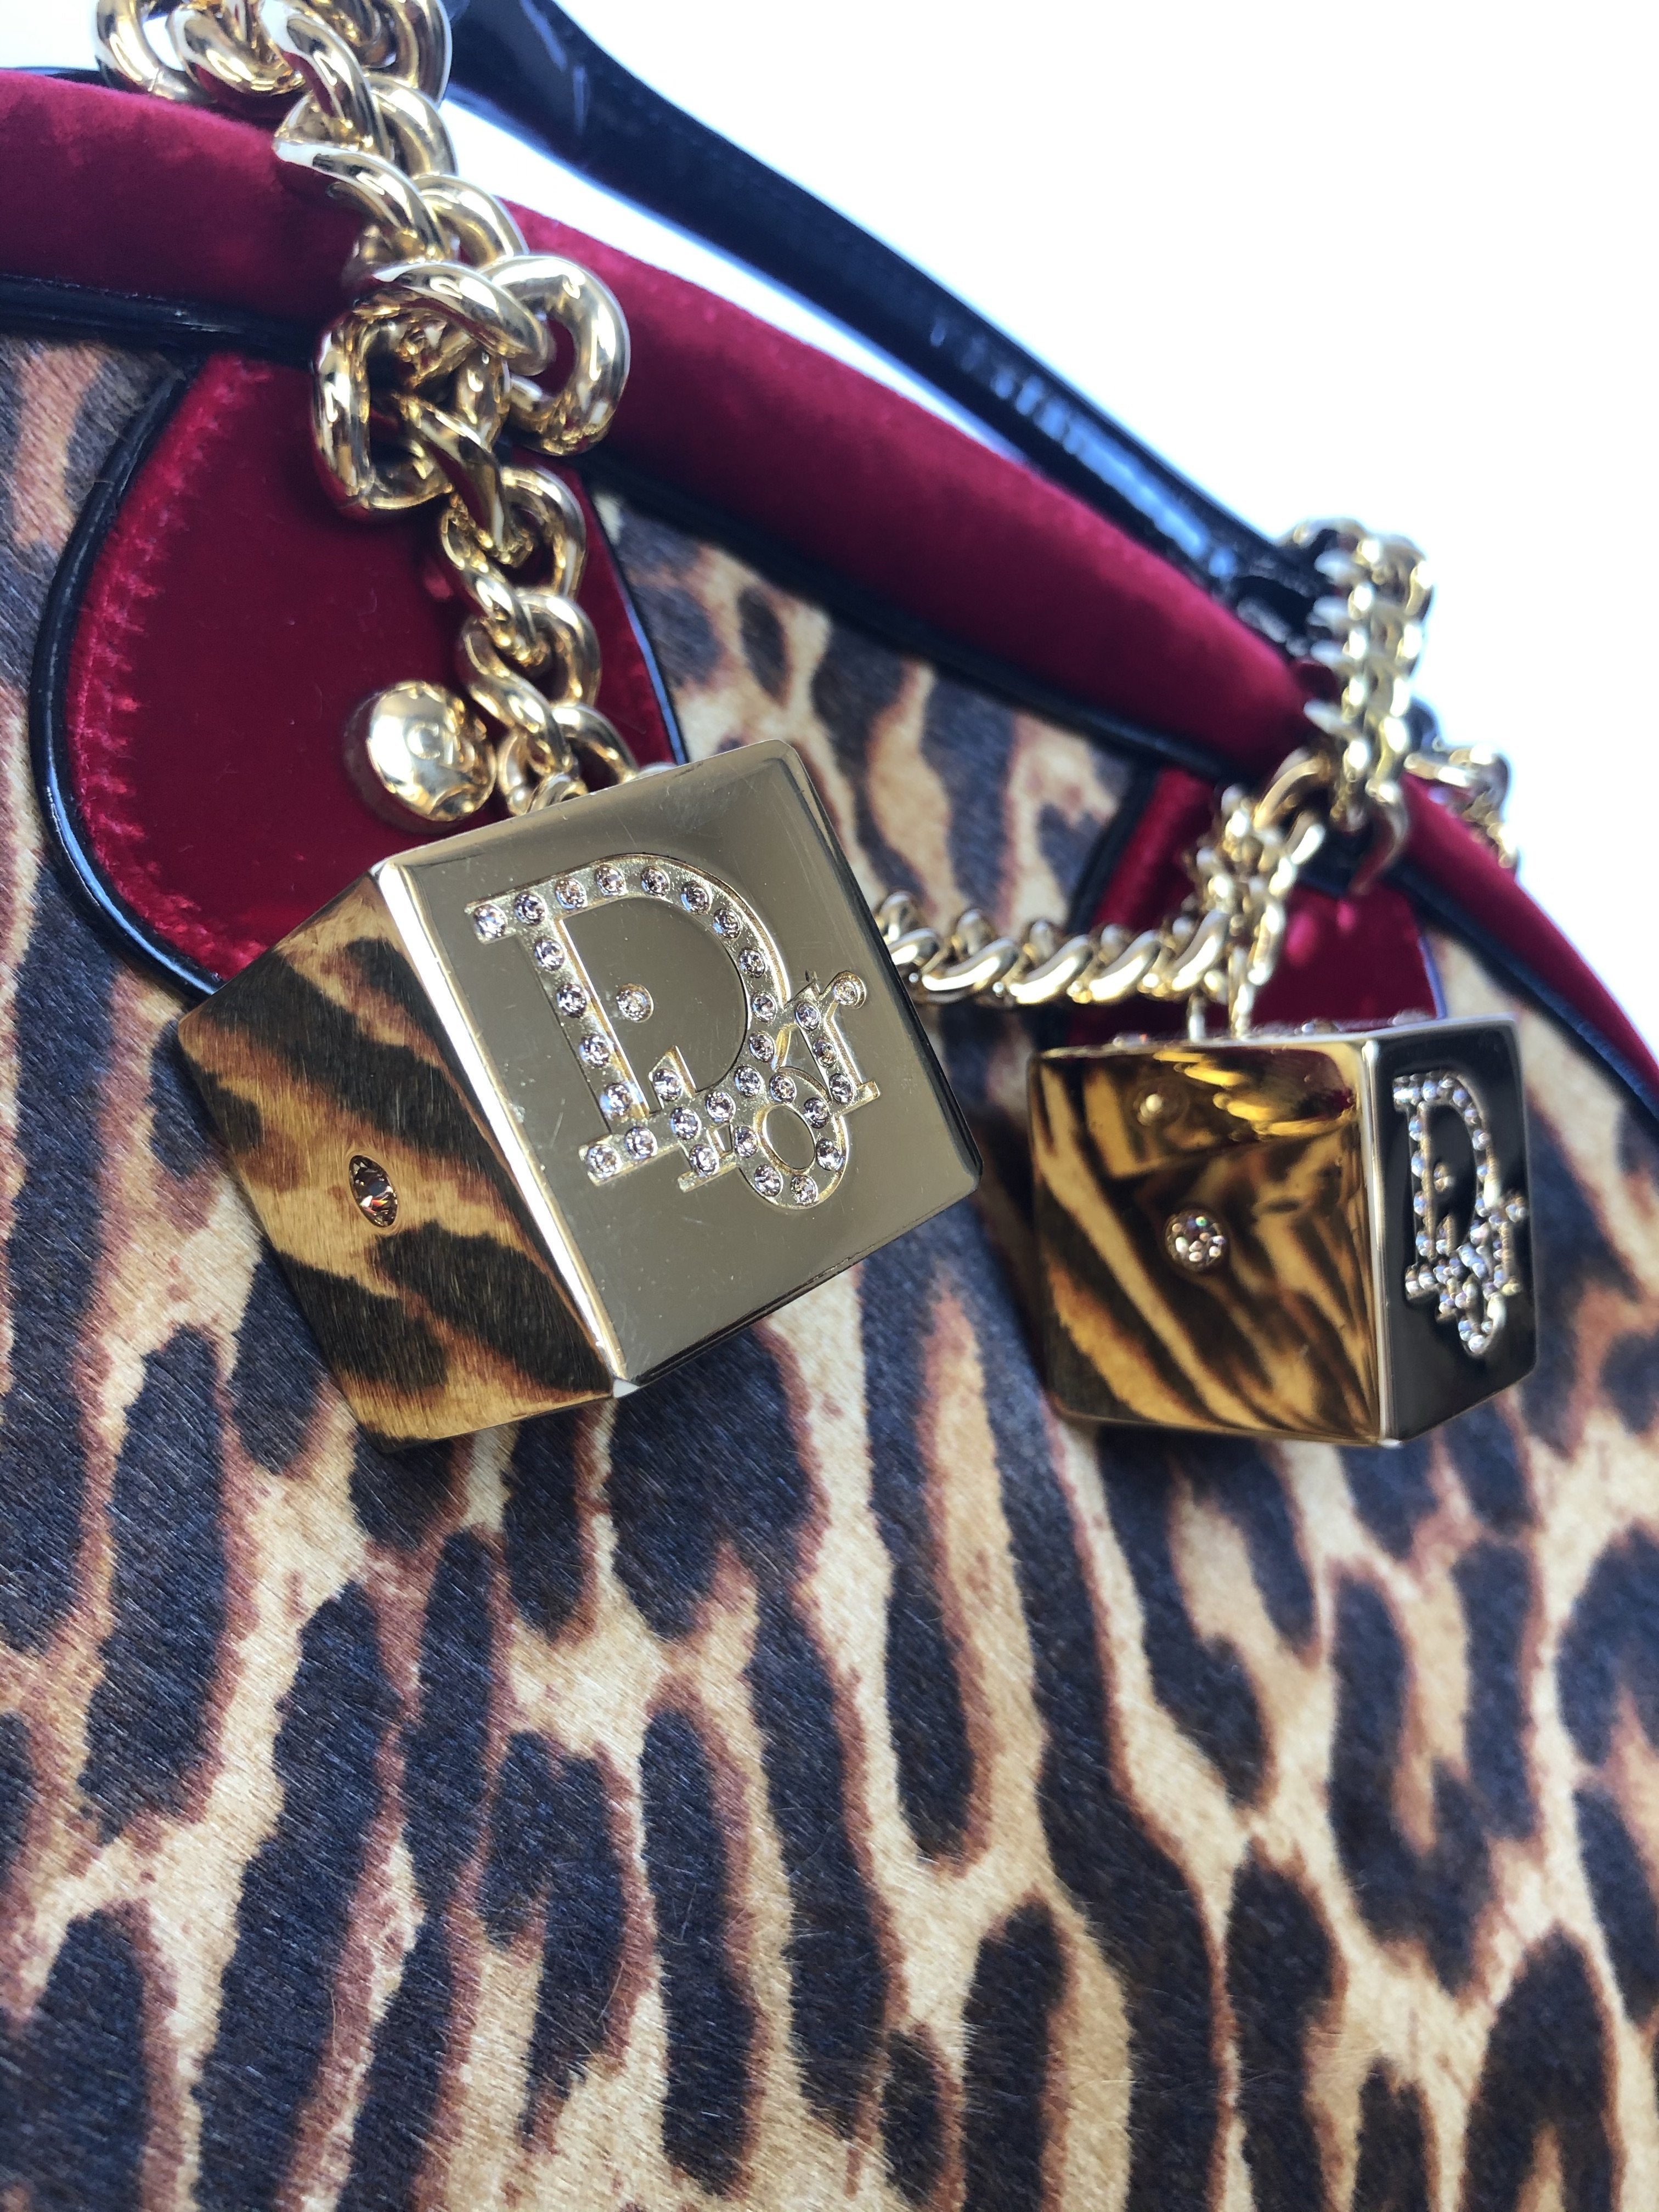 Christian Dior Bowler Bag with Dice Details